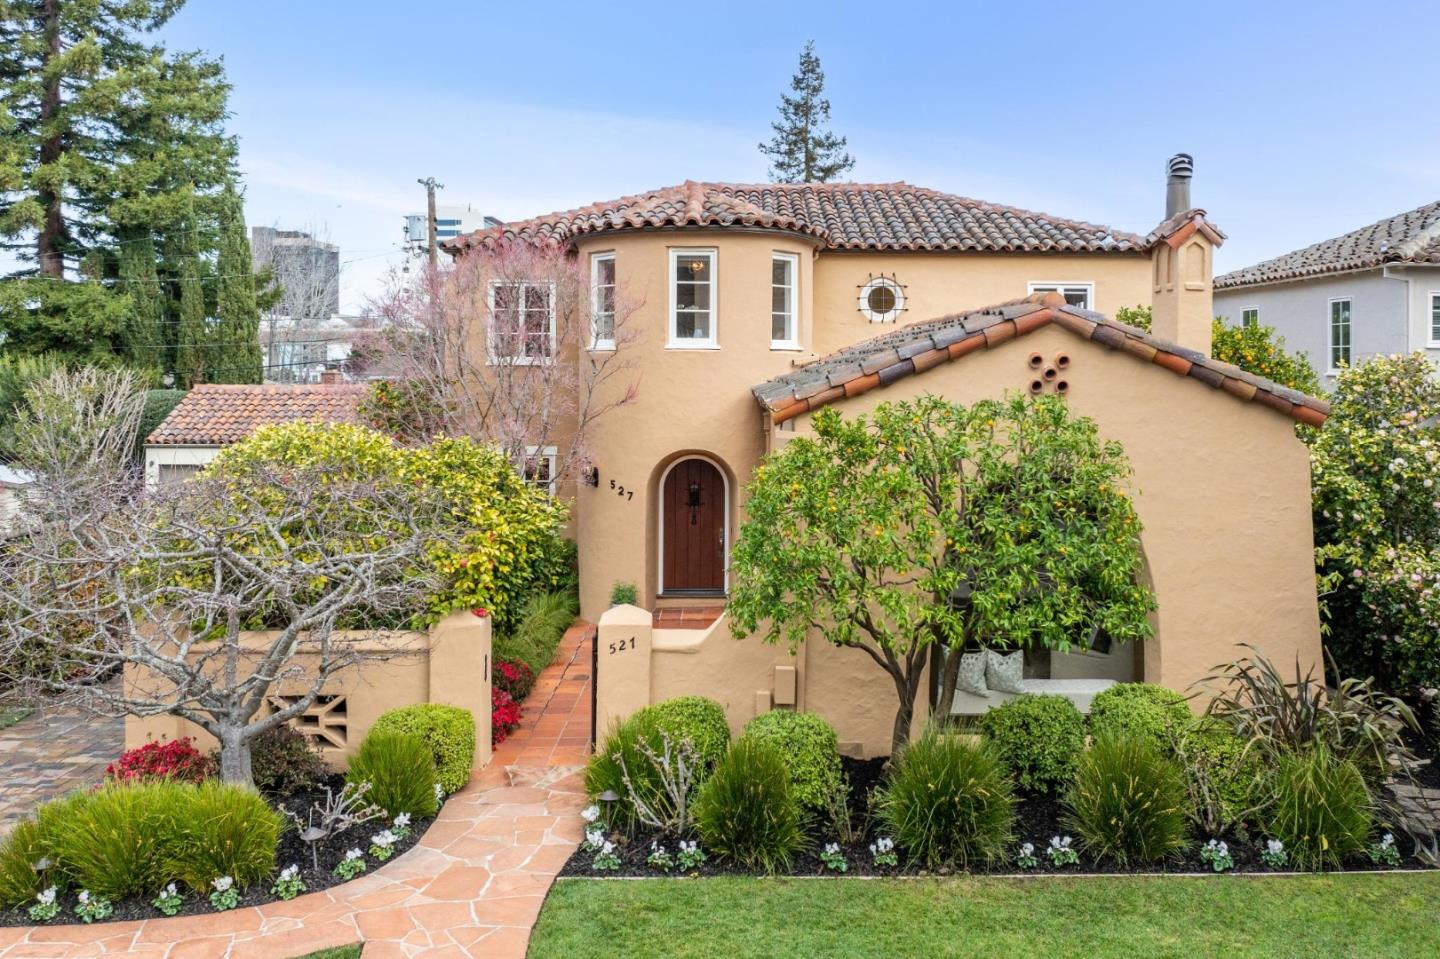 Located in the heart of San Mateo's coveted Baywood neighborhood, this architecturally stunning Spanish-inspired home with a classic stucco exterior, red-tiled roof, and charming courtyard makes an impressive and welcoming first impression. Paying homage to its' 1927 design while being carefully updated with modern conveniences, this home offers four spacious bedrooms and three luxurious bathrooms. In true Spanish style, the gorgeous living room wows with a vaulted and wood-beamed ceiling, arched bay window, wood-burning focal fireplace,  newly refinished hardwood floors, and French doors leading to the idyllic courtyard. The gourmet kitchen is impressive with top-of-the-line appliances, granite counters, custom cabinets, adjoining breakfast room and an adjacent family room. Flowing out through French doors from the kitchen/family room is the private and serene backyard with a spacious heated deck, gas firepit, and professionally designed low-maintenance garden. Completing the 1st level is a formal dining room, bedroom/office and full bath. Three spacious bedrooms on the 2nd level including a Primary Suite retreat. Ideal location just minutes from downtown San Mateo, Central Park, San Mateo Public Library, CalTrain station, Highways 92/101/280, and excellent Baywood schools.